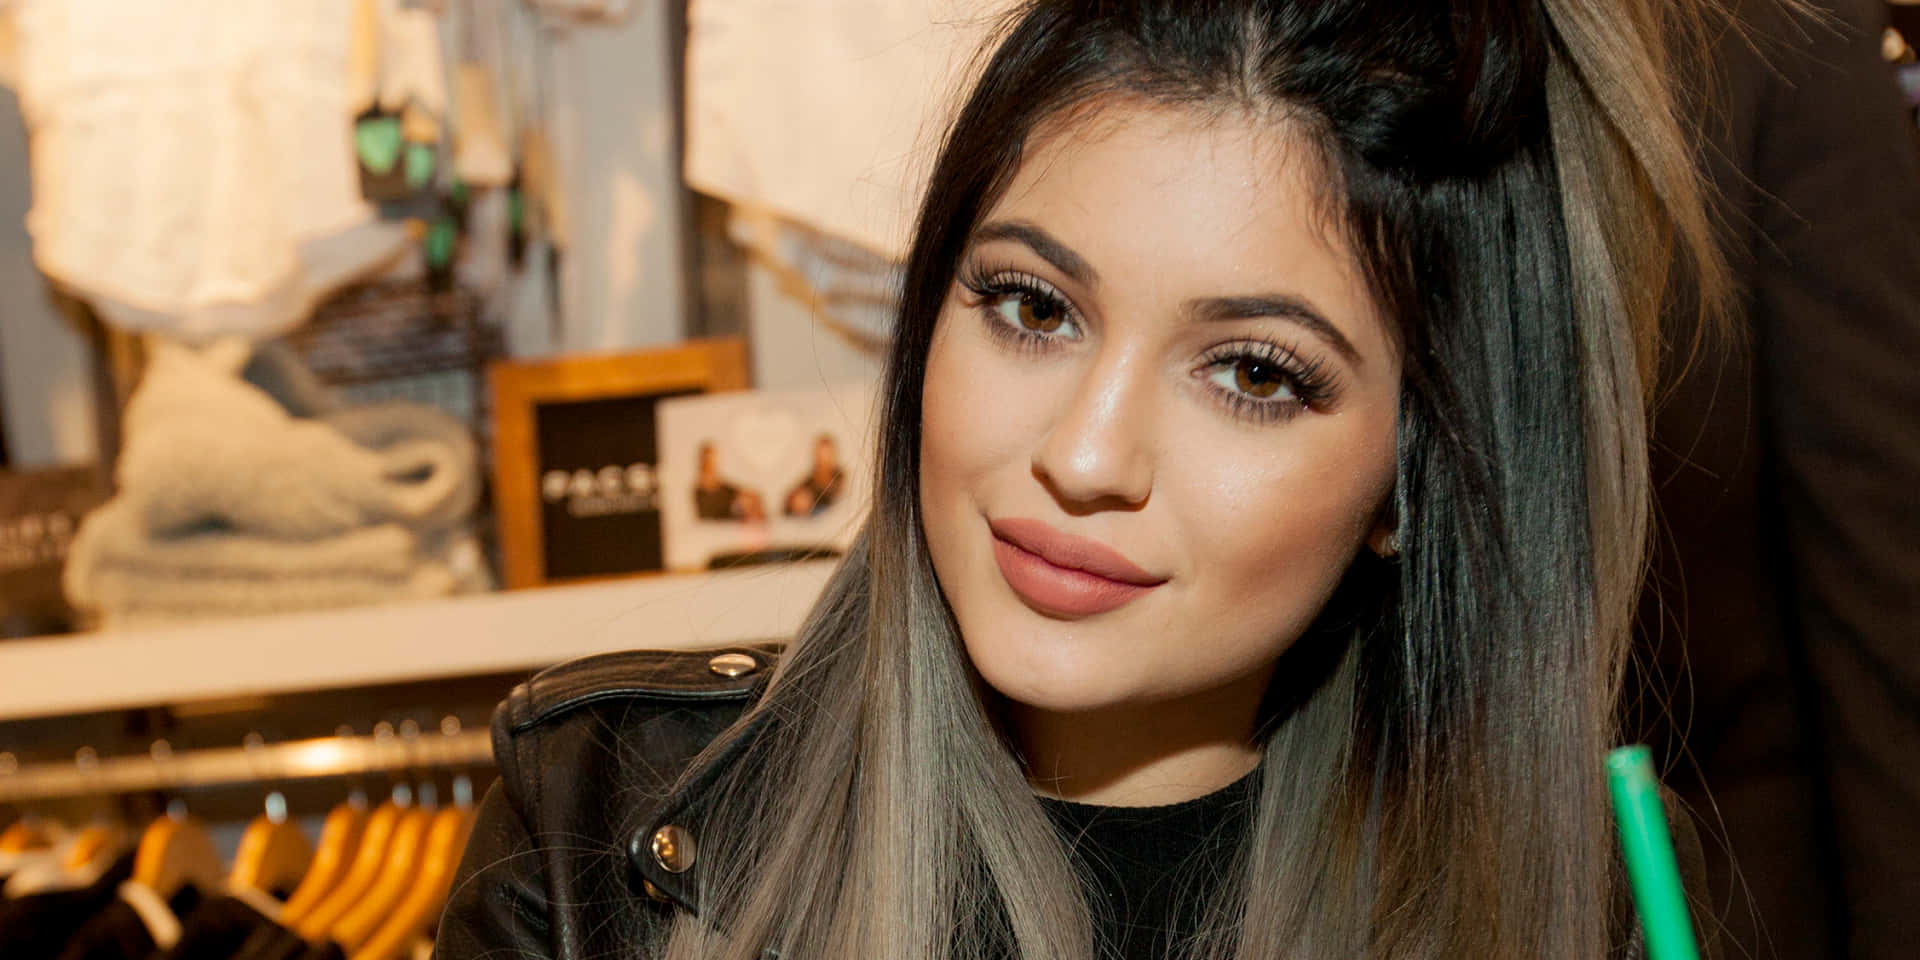 Kylie Jenner wearing a cropped black sweater, with bright pink hair and a full face of makeup. Wallpaper